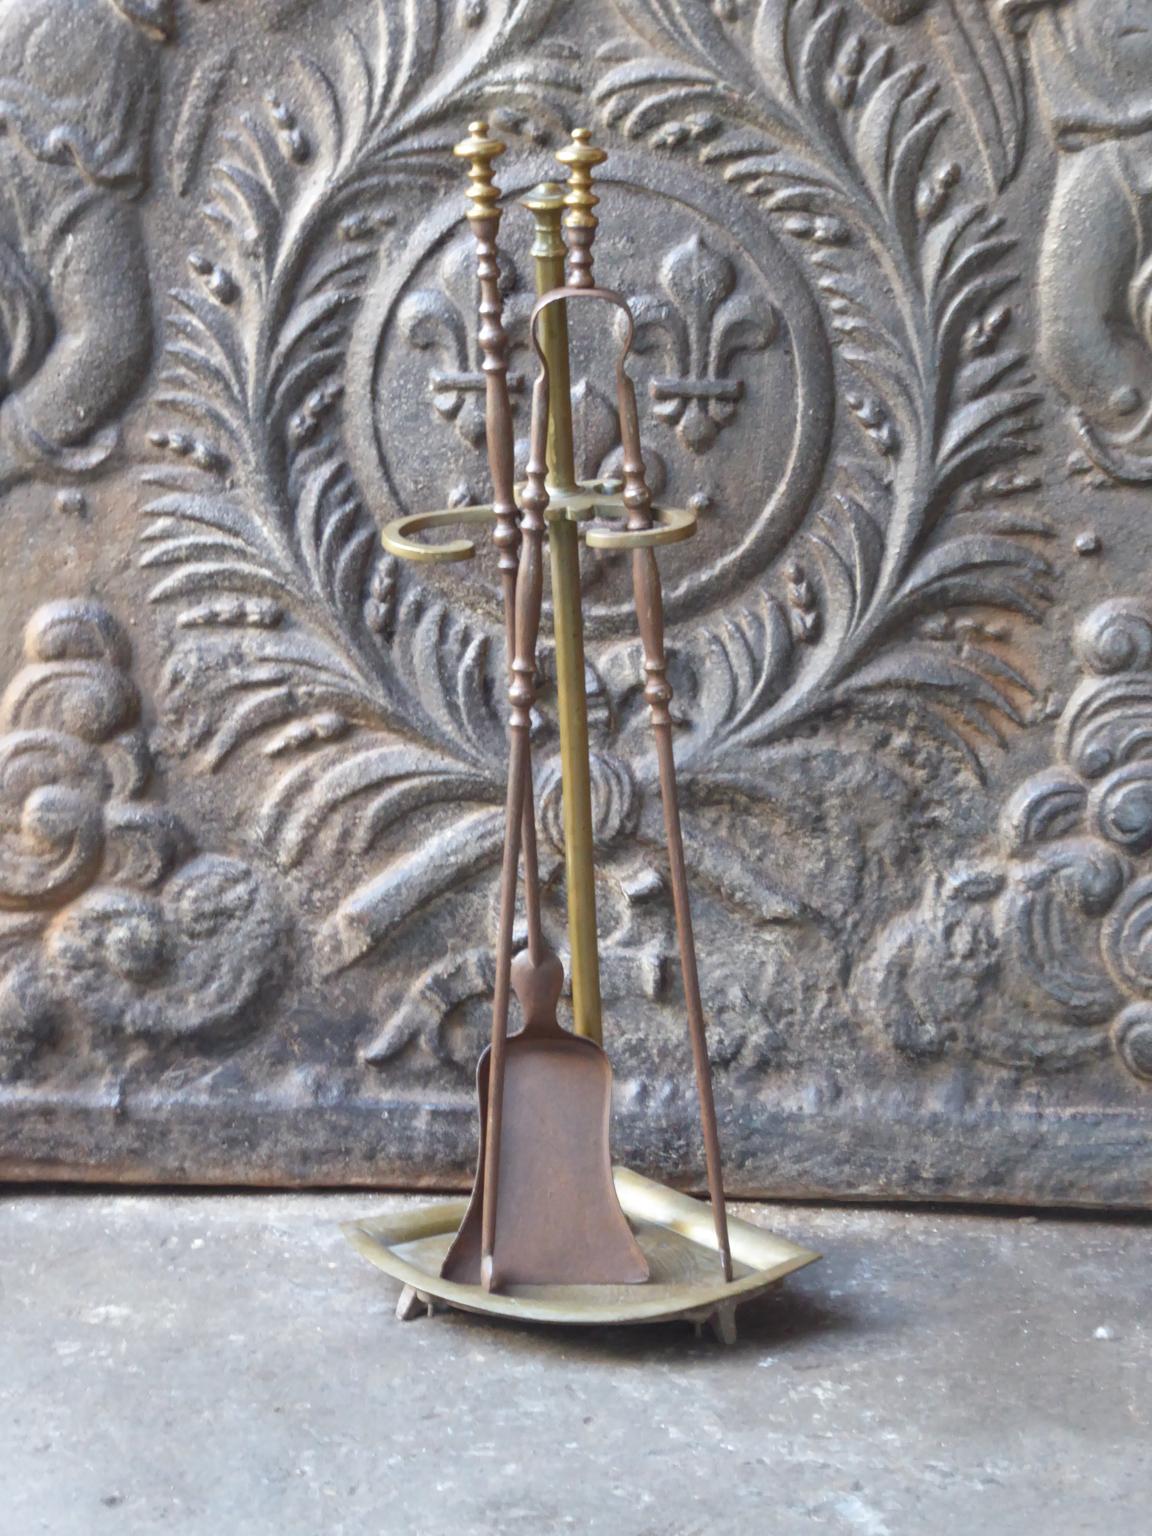 19th century French Napoleon III fireplace tool set. The toolset consists of a stand and two fire irons. All are made of wrought iron and brass. It is in a good condition and is fully functional.
 
 





   